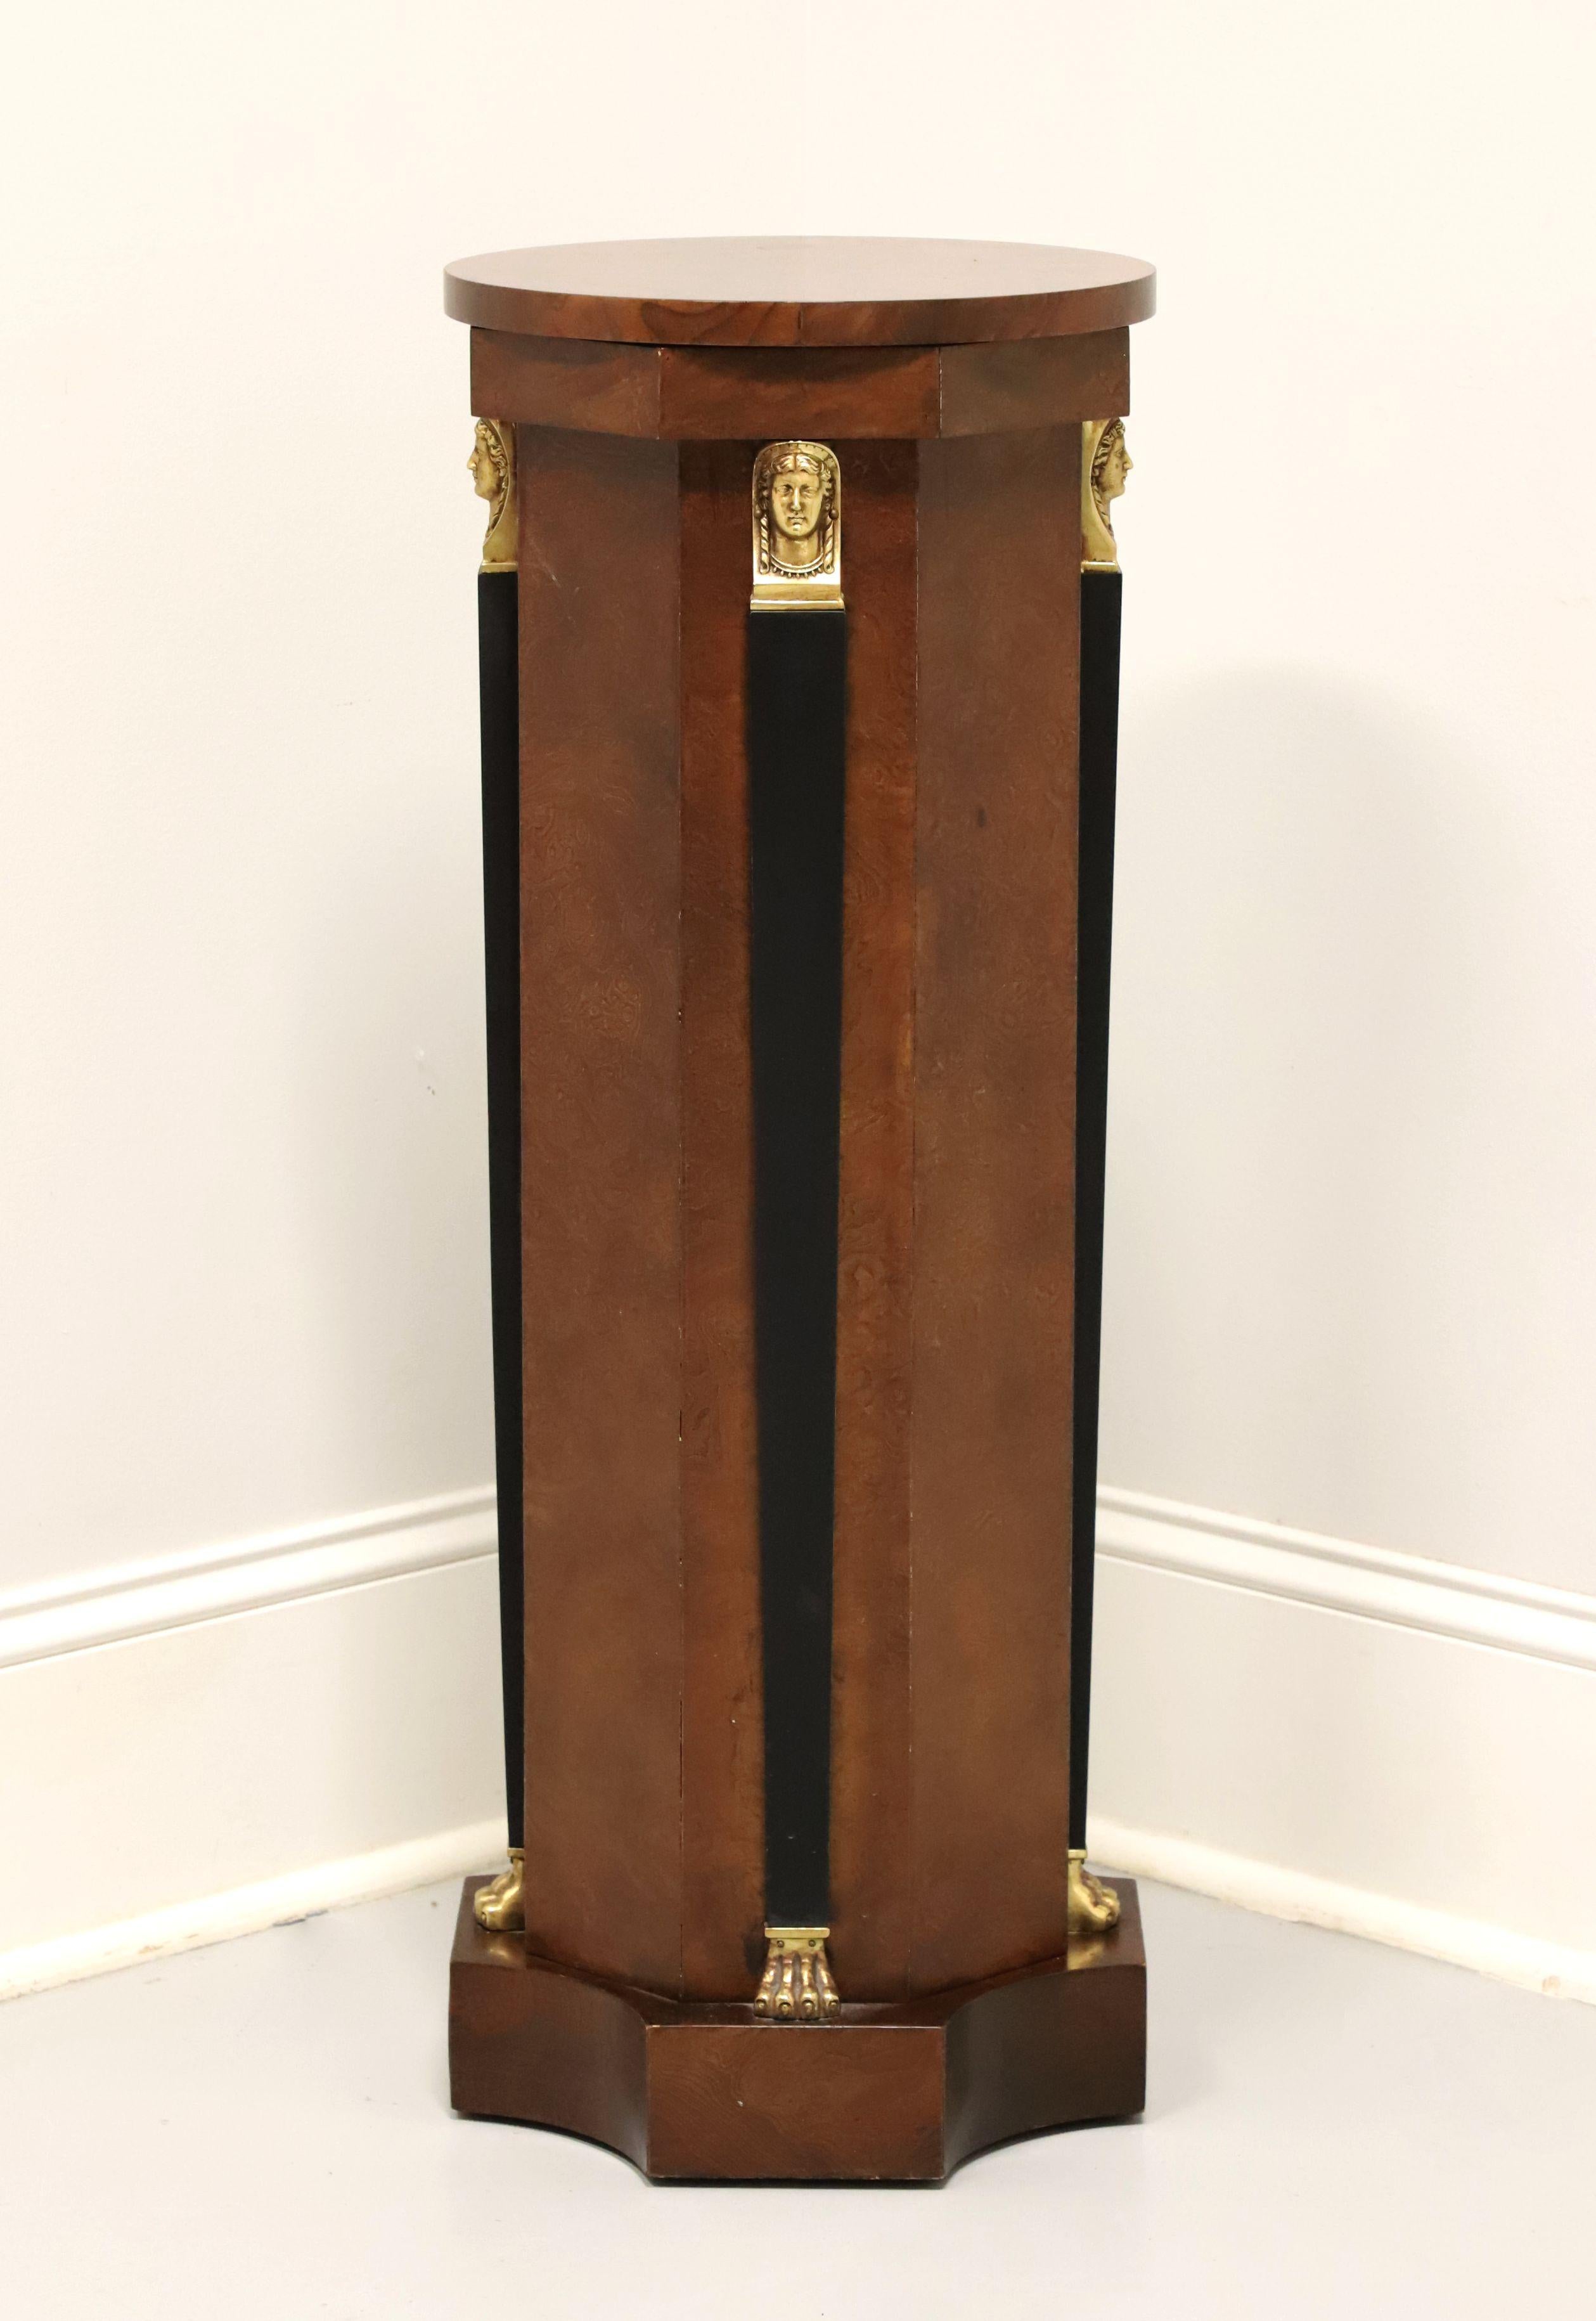 BAKER Burl Black Lacquer Neoclassical Pedestal Display Column / Plant Stand 4